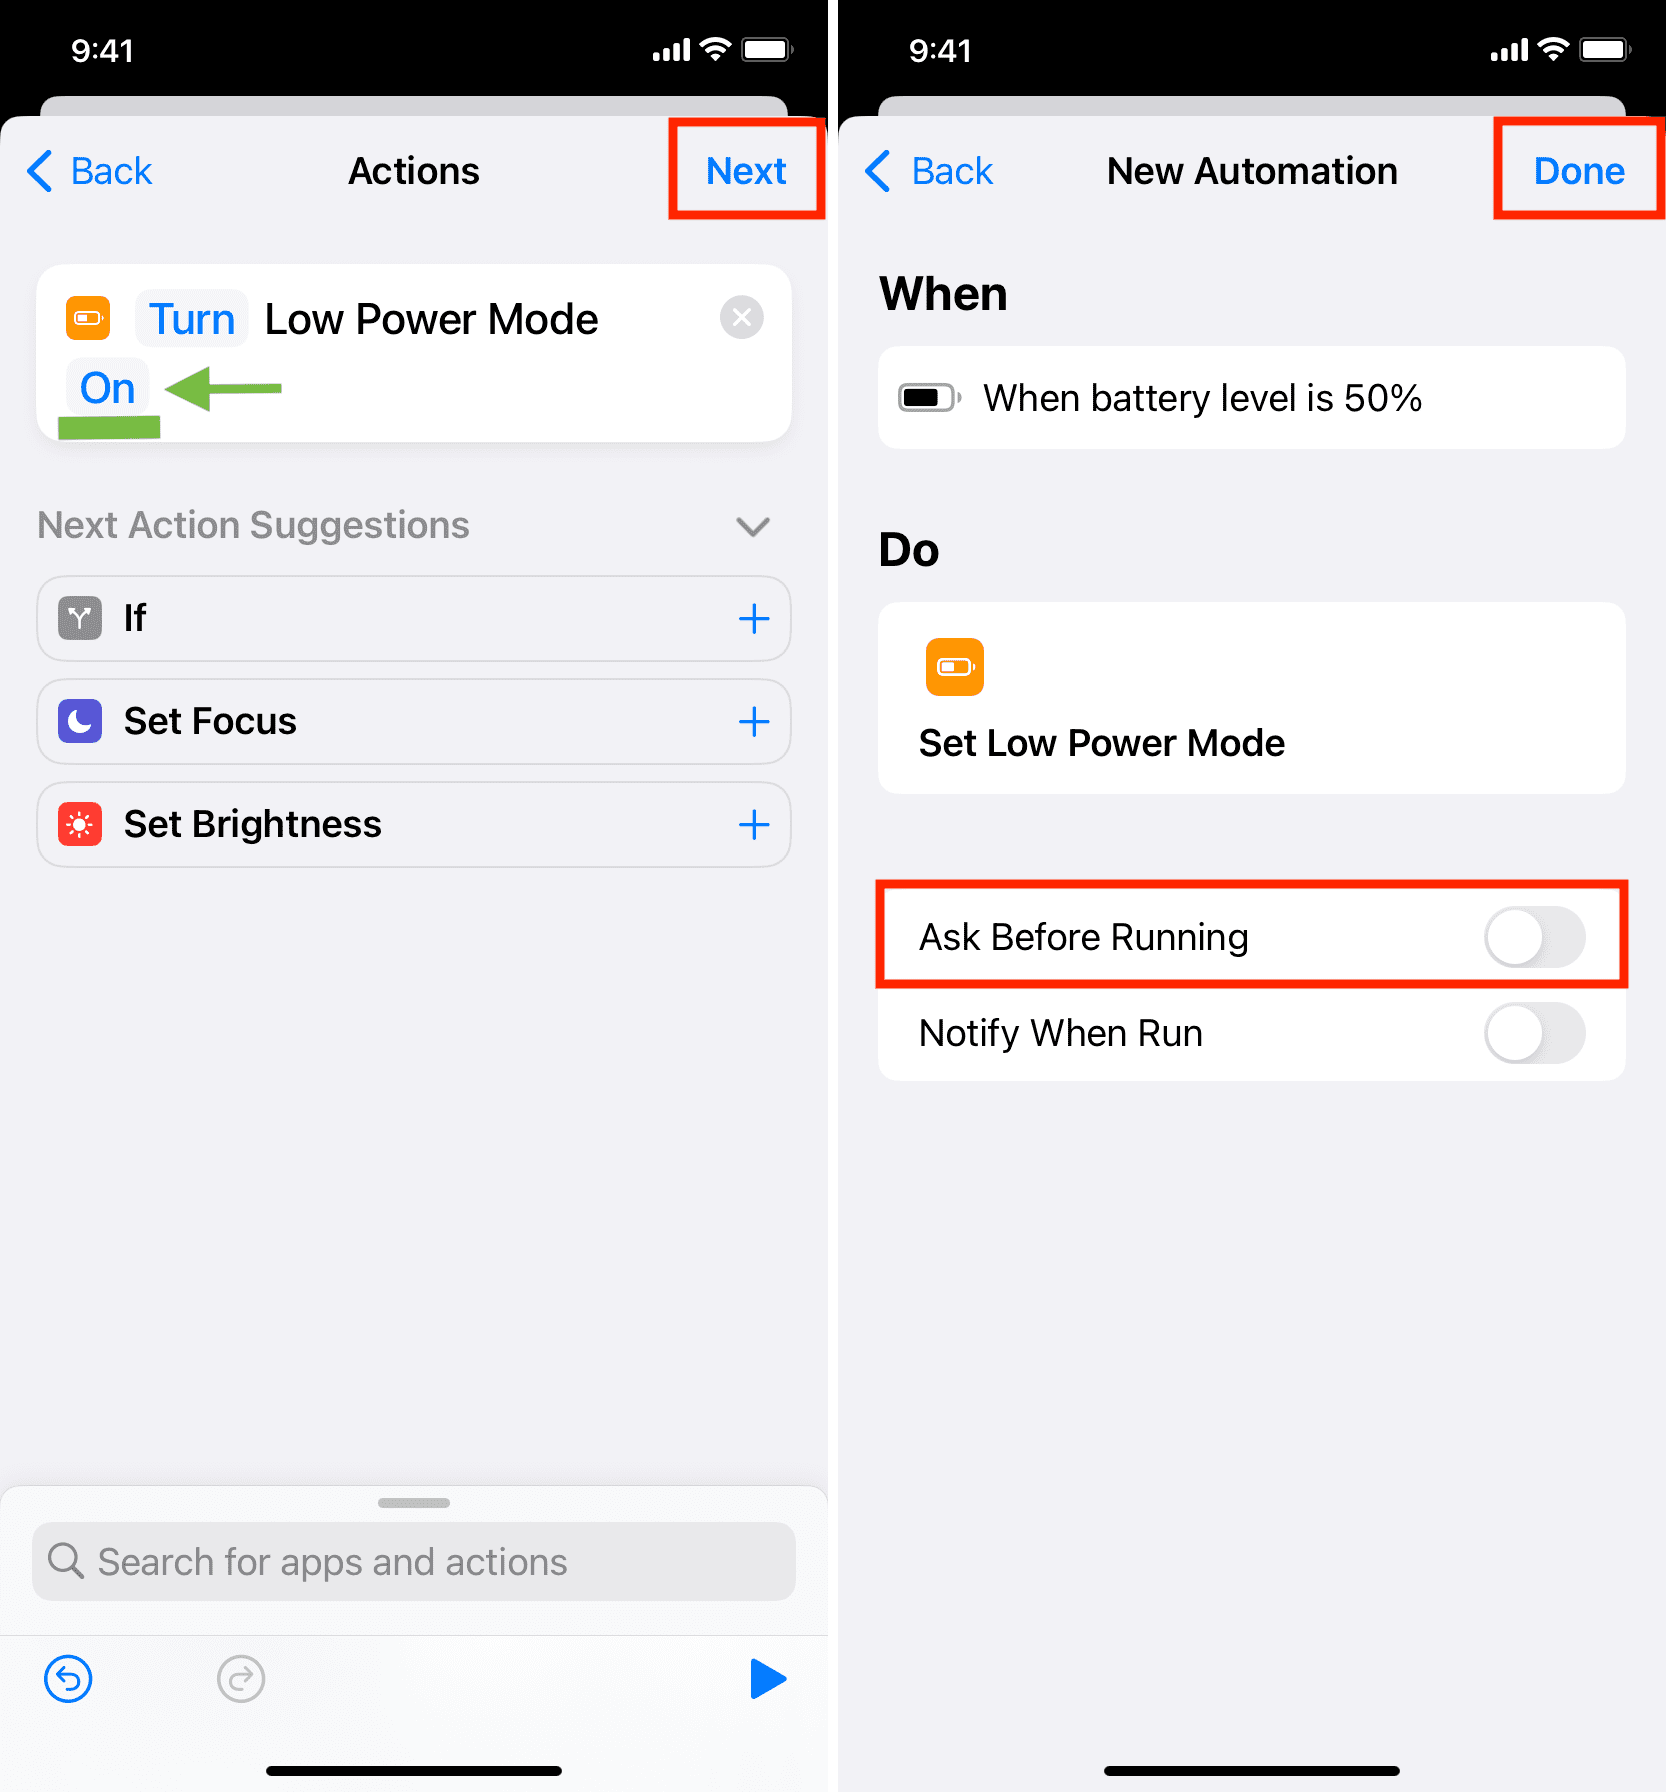 Finish creating iOS automation to enable Low Power Mode automatically